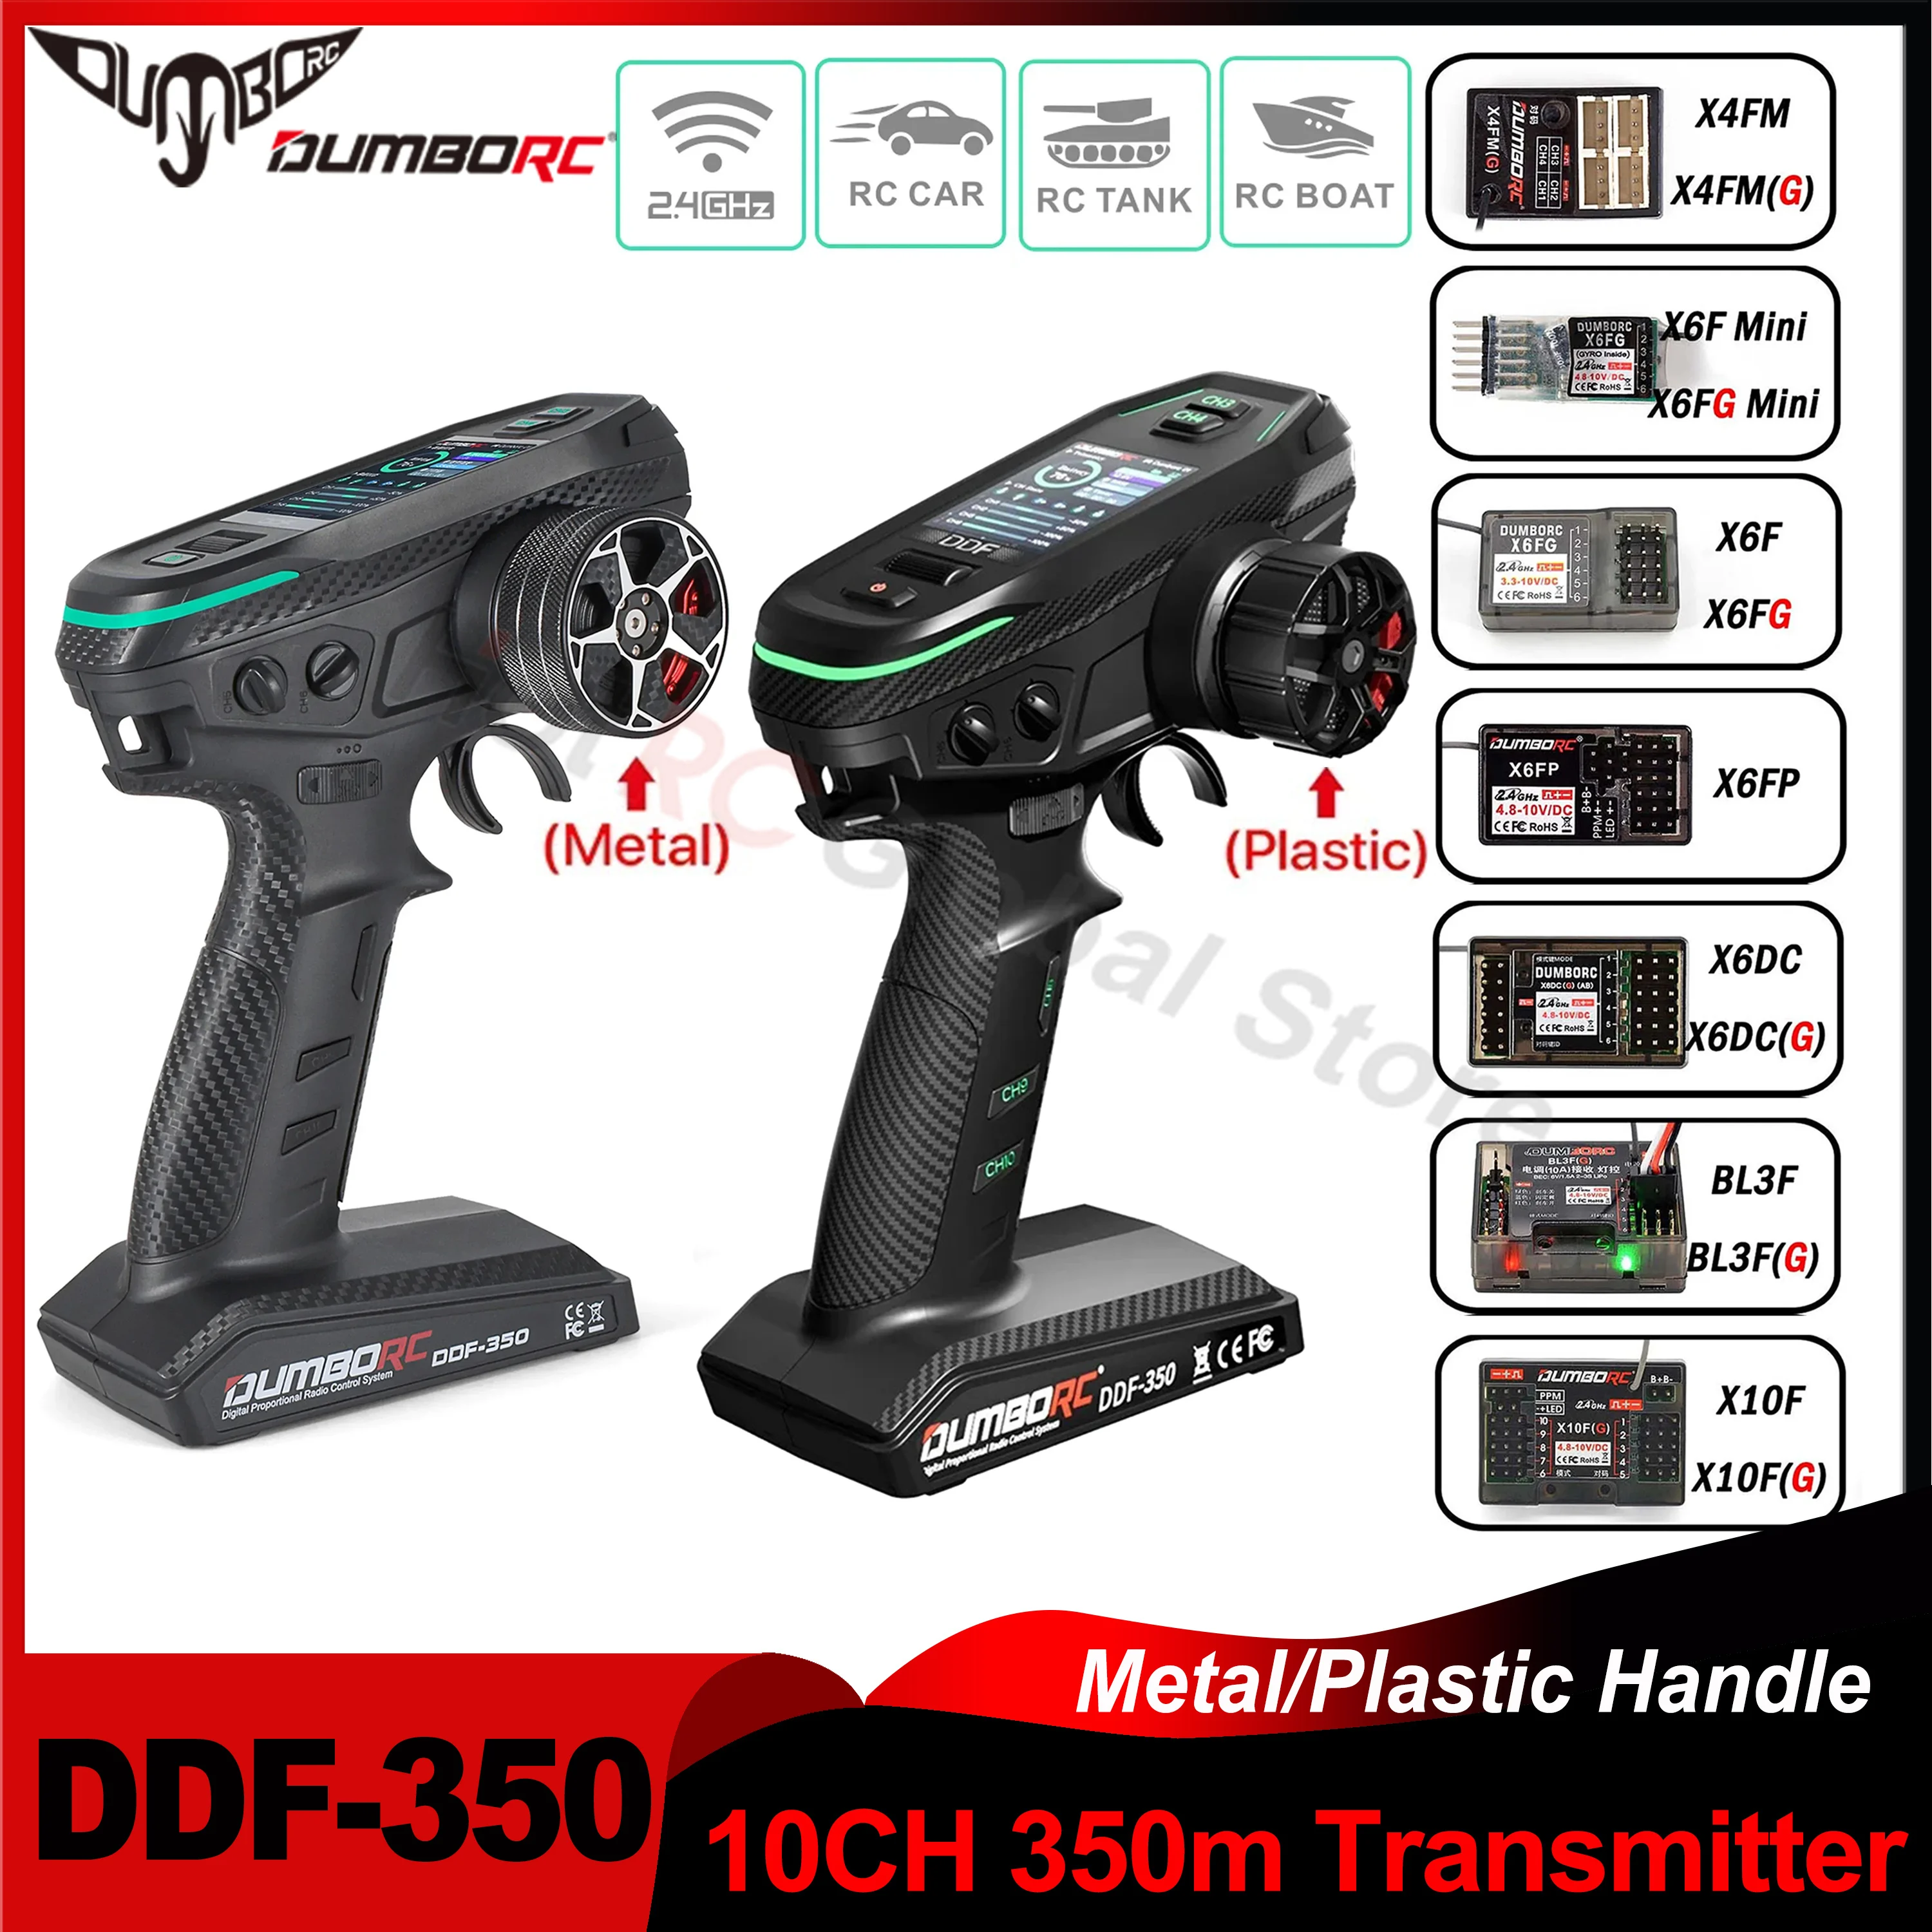 

DUMBORC DDF-350 10CH 2.4G Remote Controller 10 Channel Transmitter&Receiver HD Screen 4/6/10Channel Gyro for RC Car Tank Boat